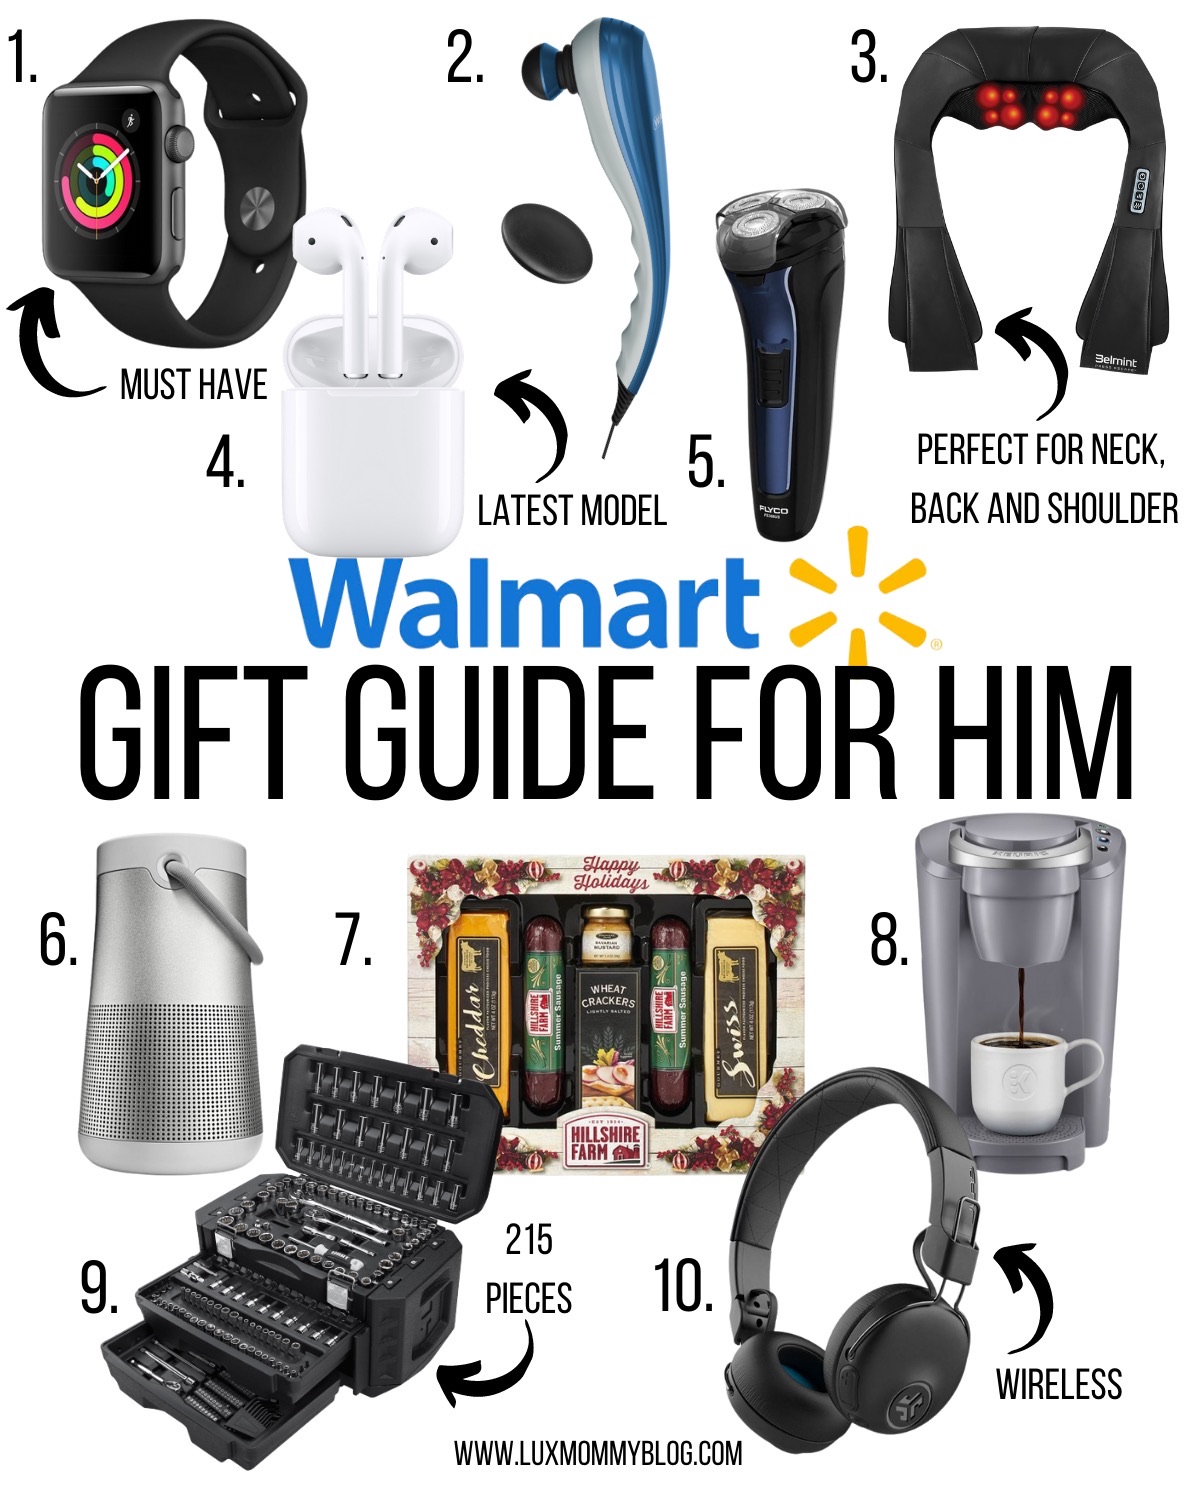 Last Minute Gift Guides for Him and Her - Stilettos & Diapers